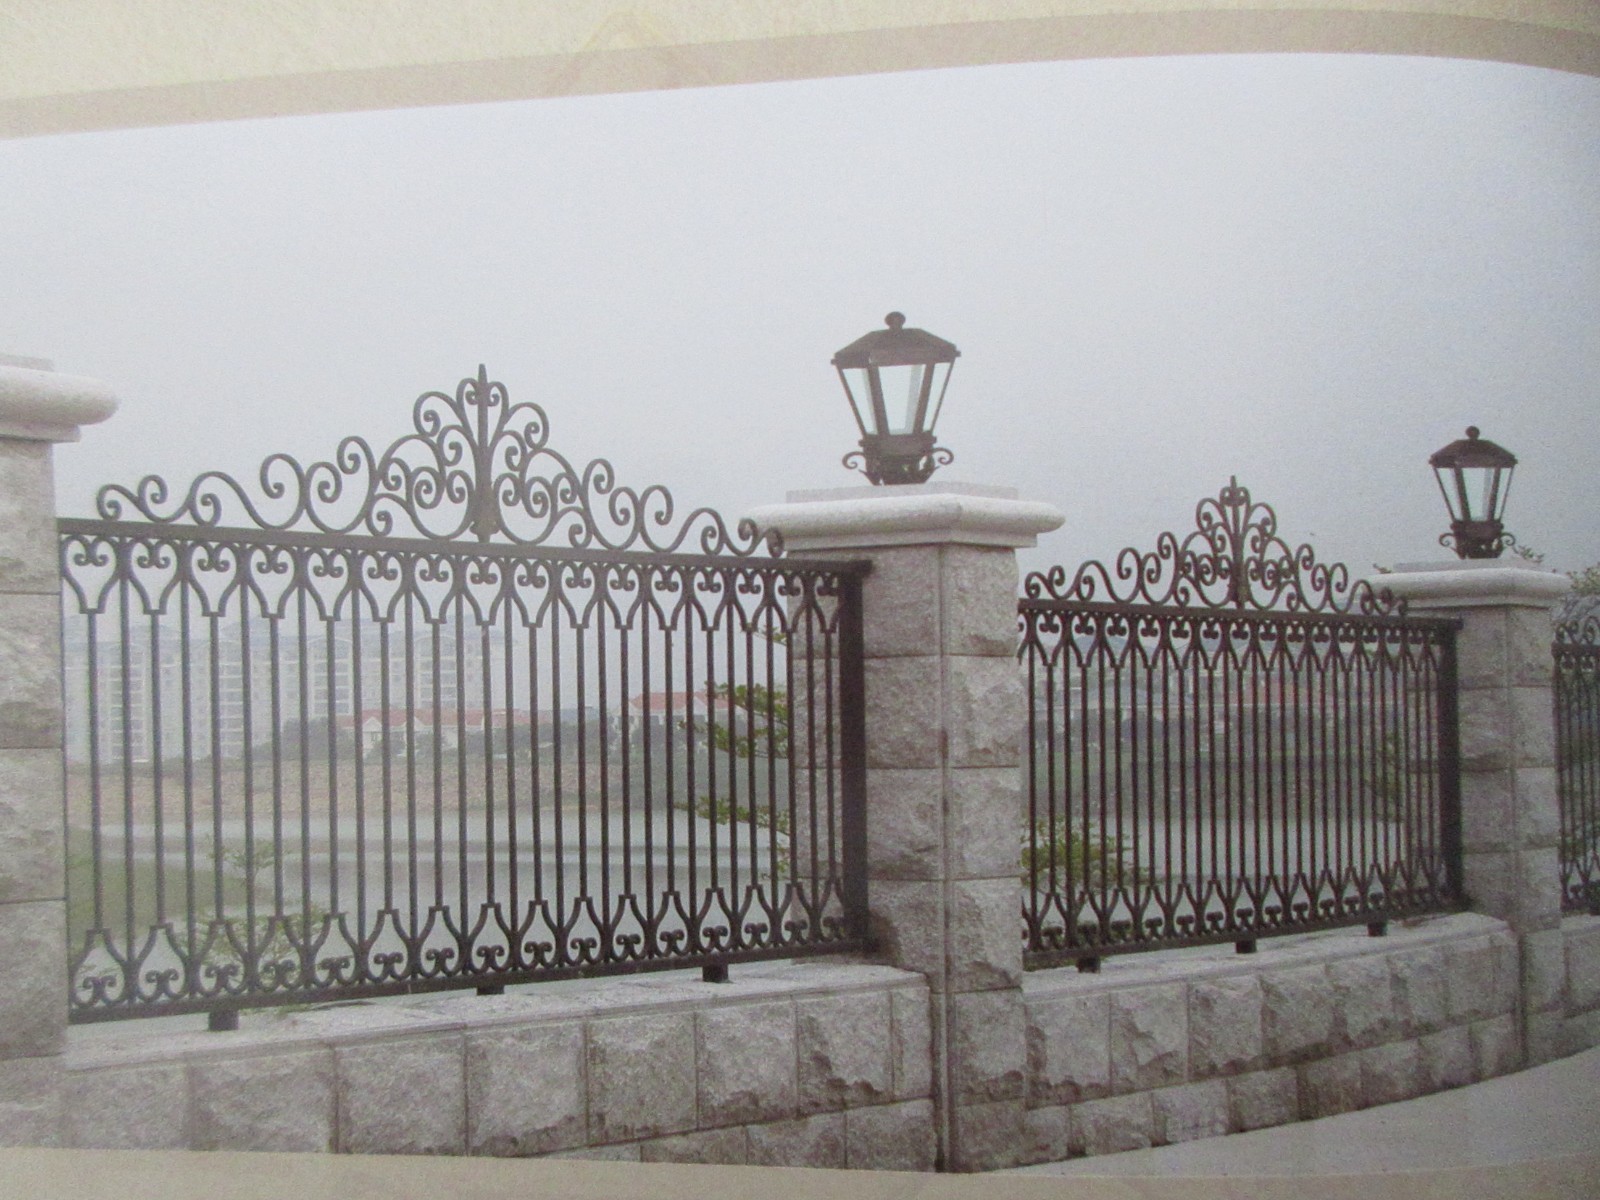 Wrought iron fence gates manufacturers China garden metal steel fencing driveway gate sppliers Hc-f4